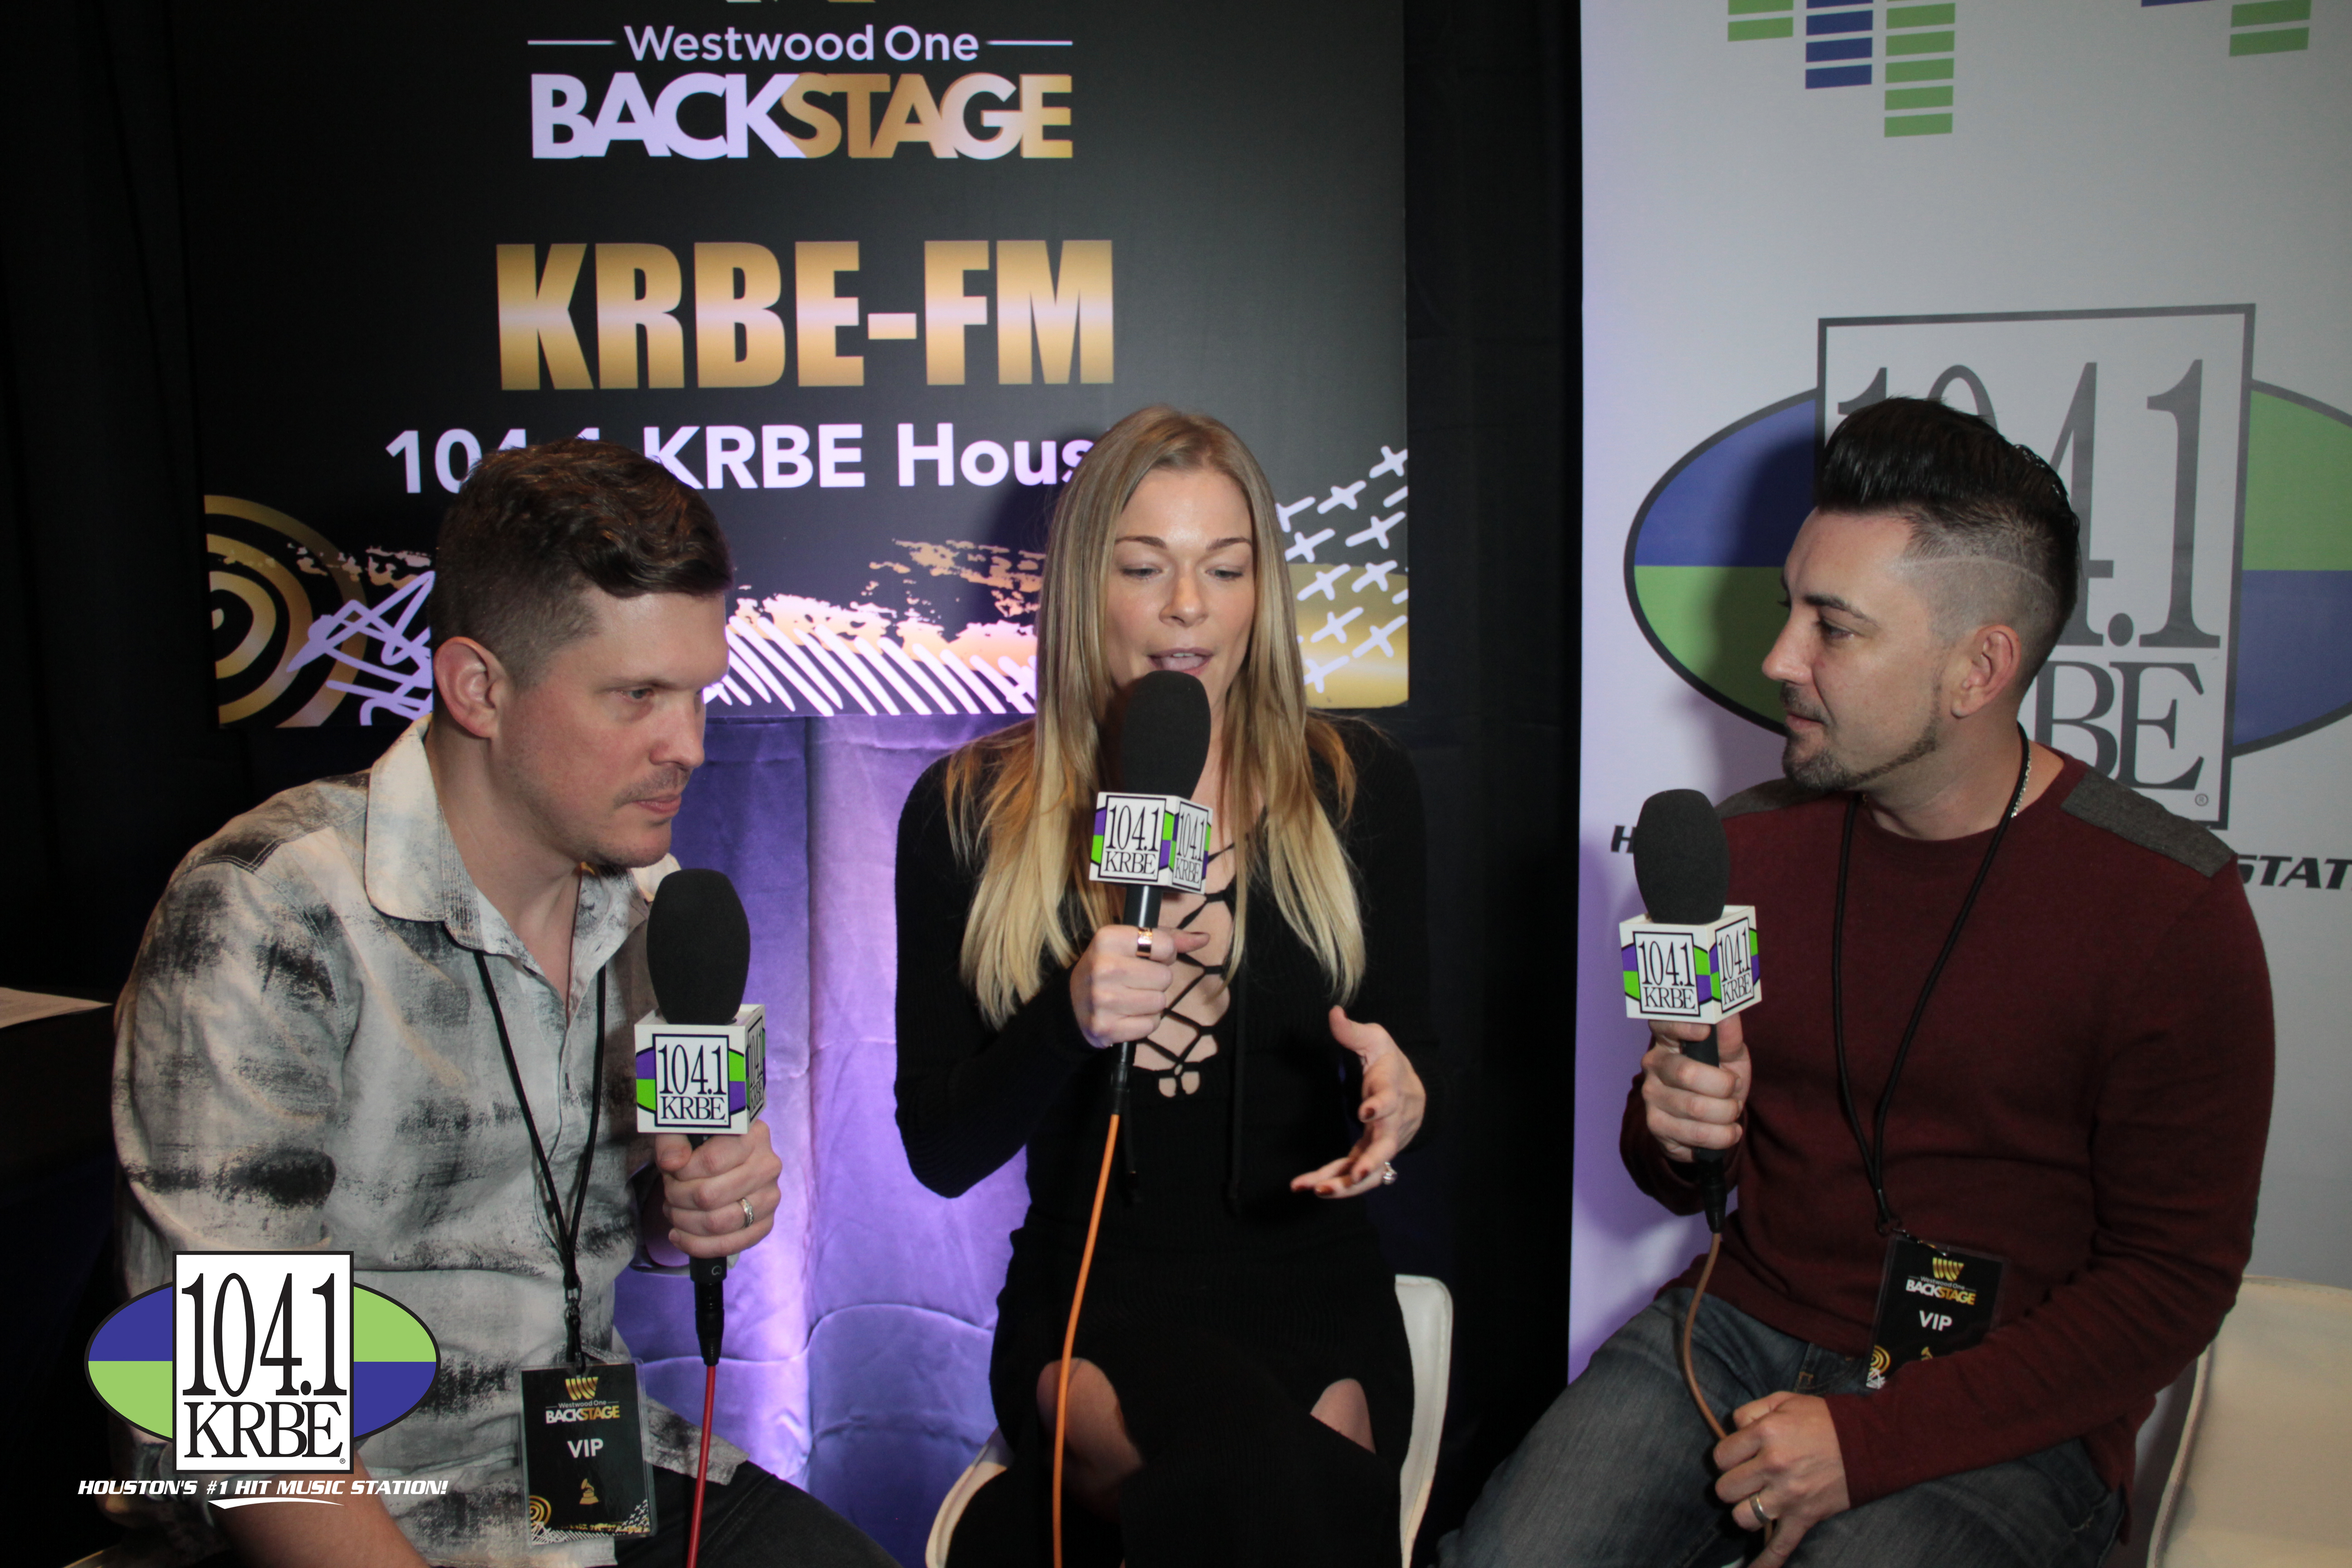 PHOTO: 104.1 KRBE DJ's Special K and Kevin Quinn interview LeAnn Rimes on Radio Row. Photo courtesy of E.J. Santillan and 104.1 KRBE.